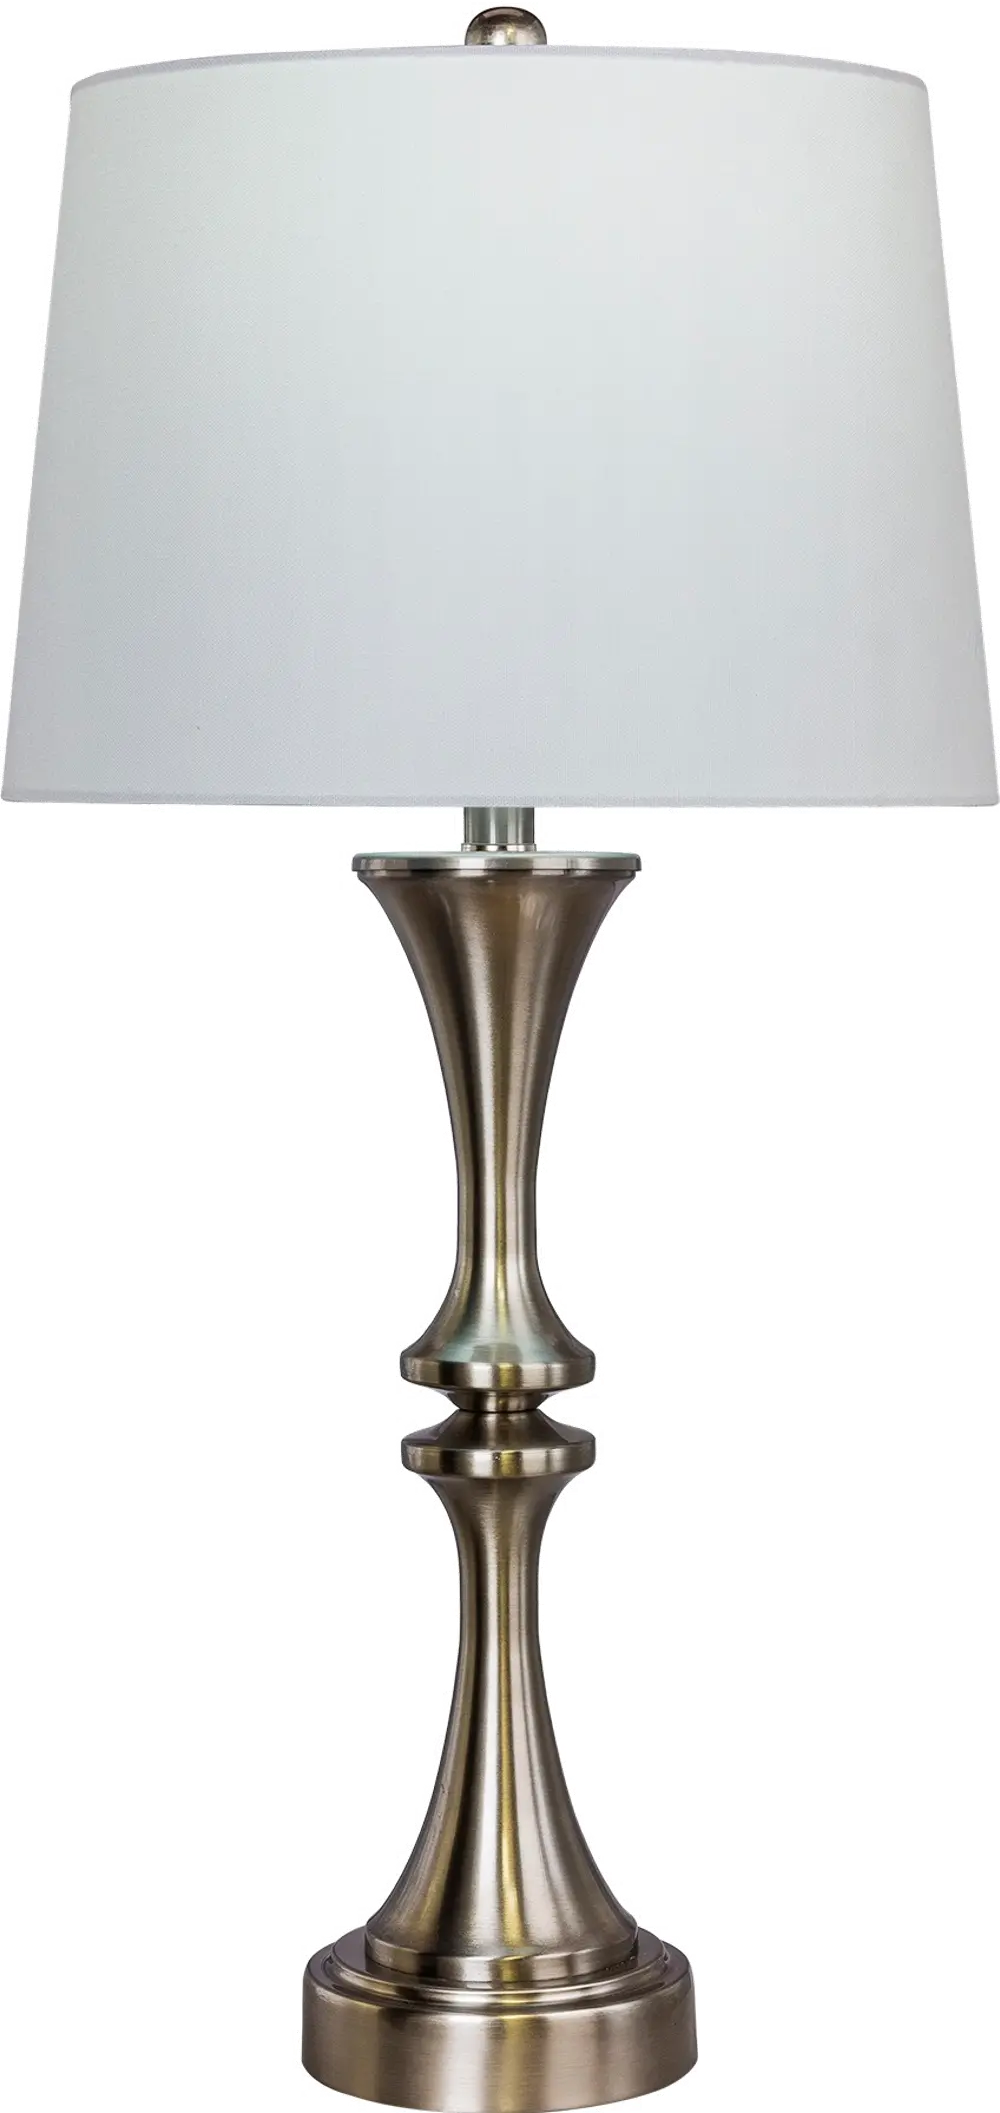 Brushed Steel Metal Table Lamp with USB Port-1